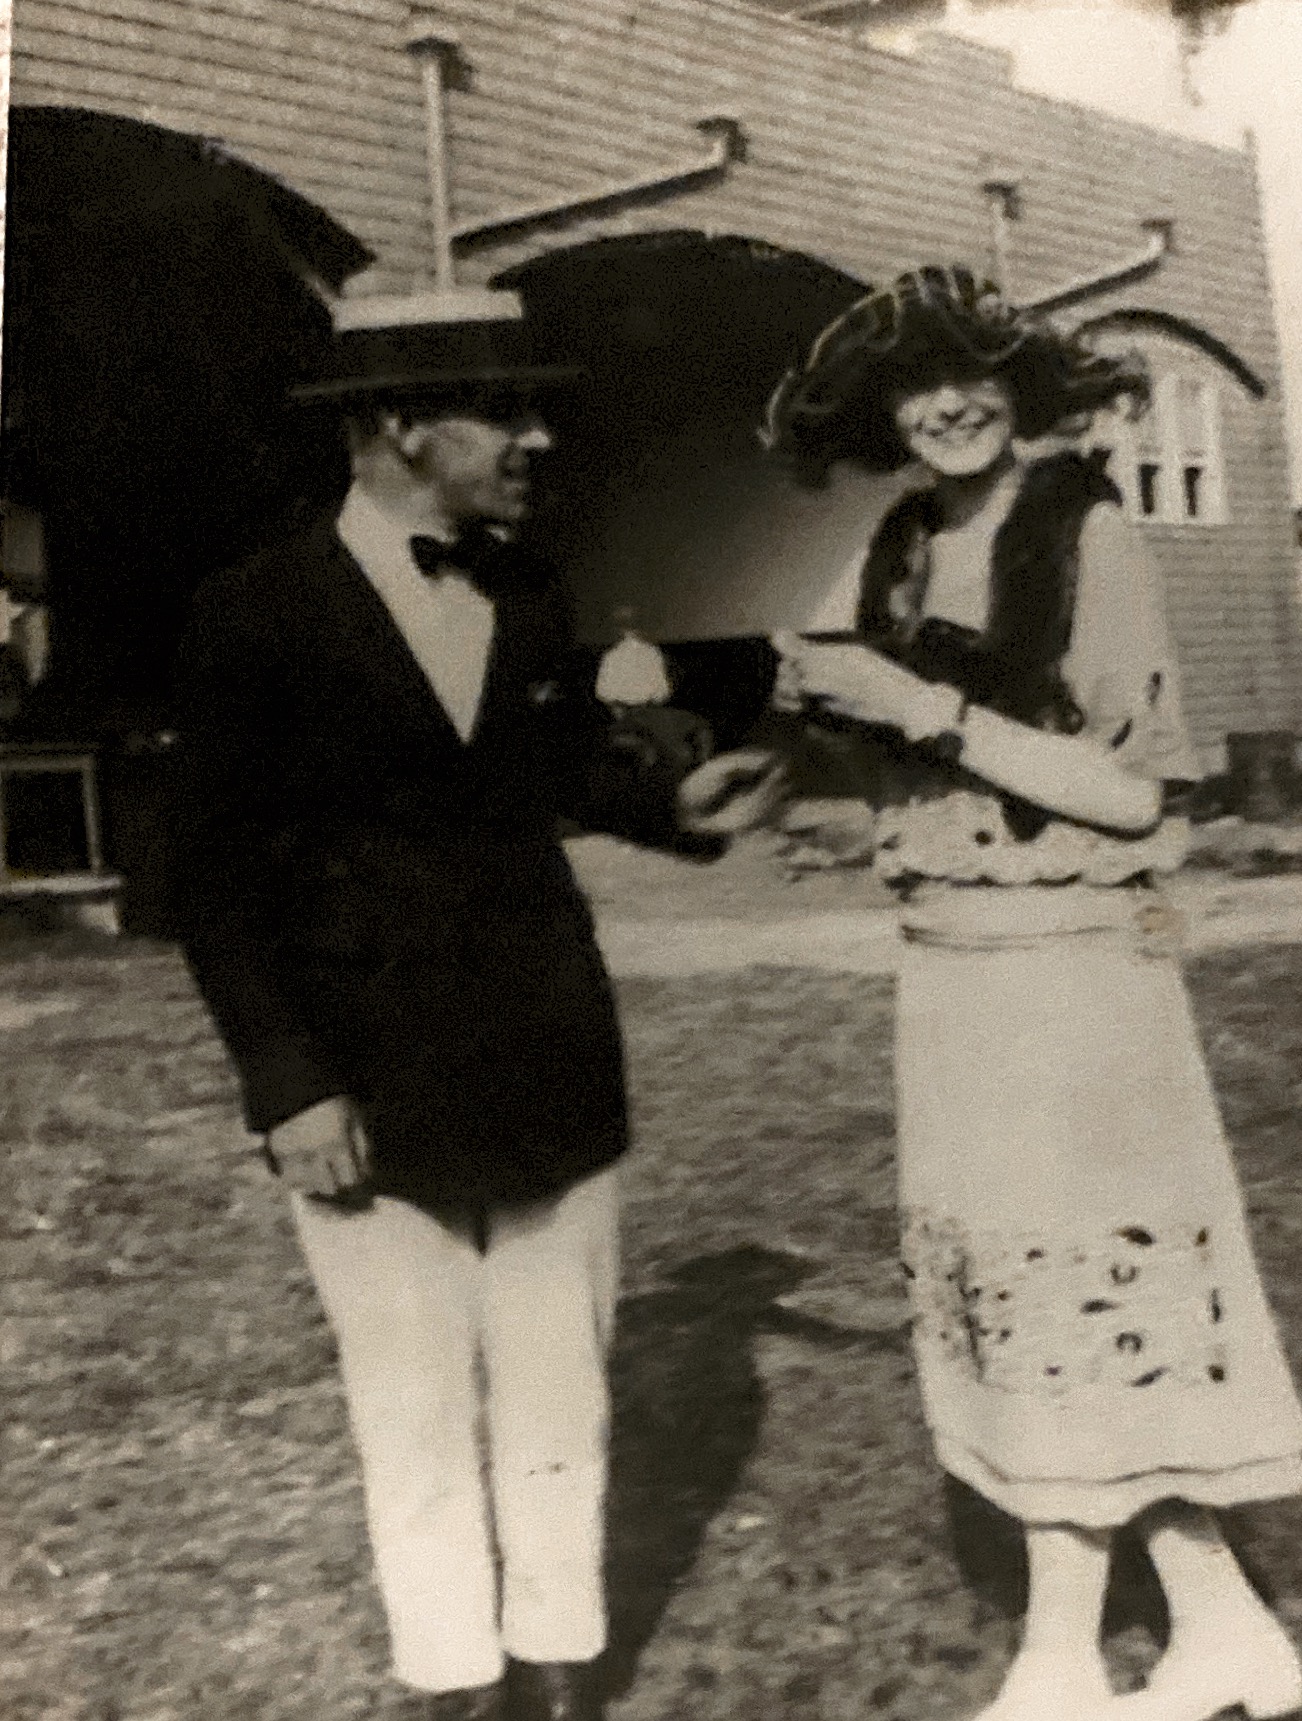 Collin’s parents, Collin and Mildred Haynie in Ocean View 1920’s